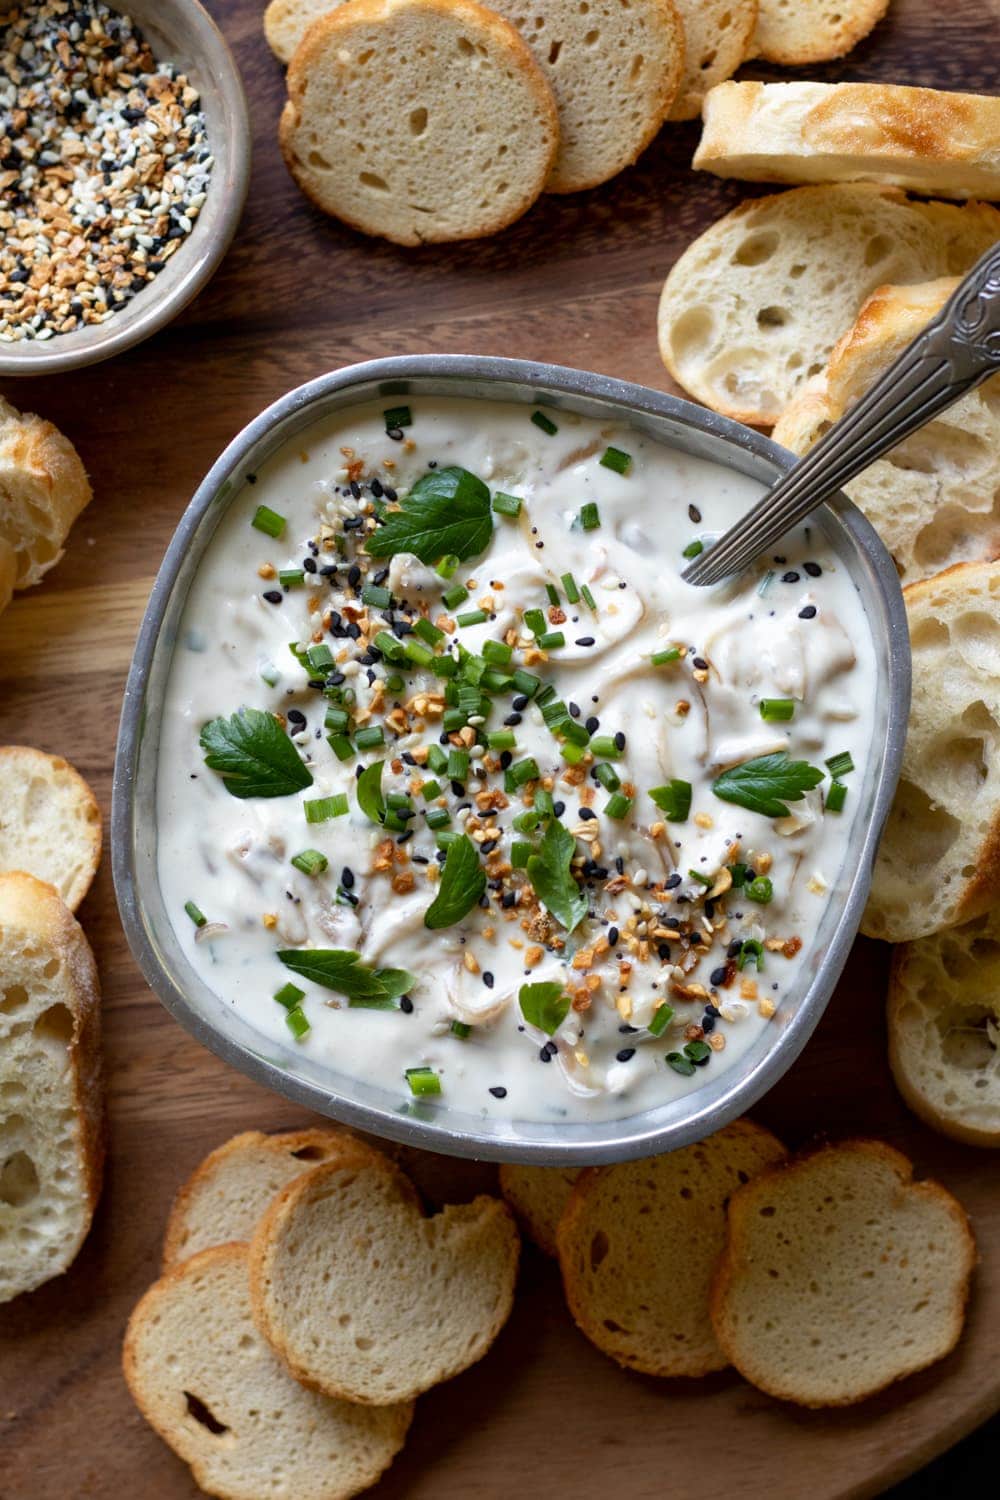 Caramelized Shallot Dip in a bowl with spoon and bread